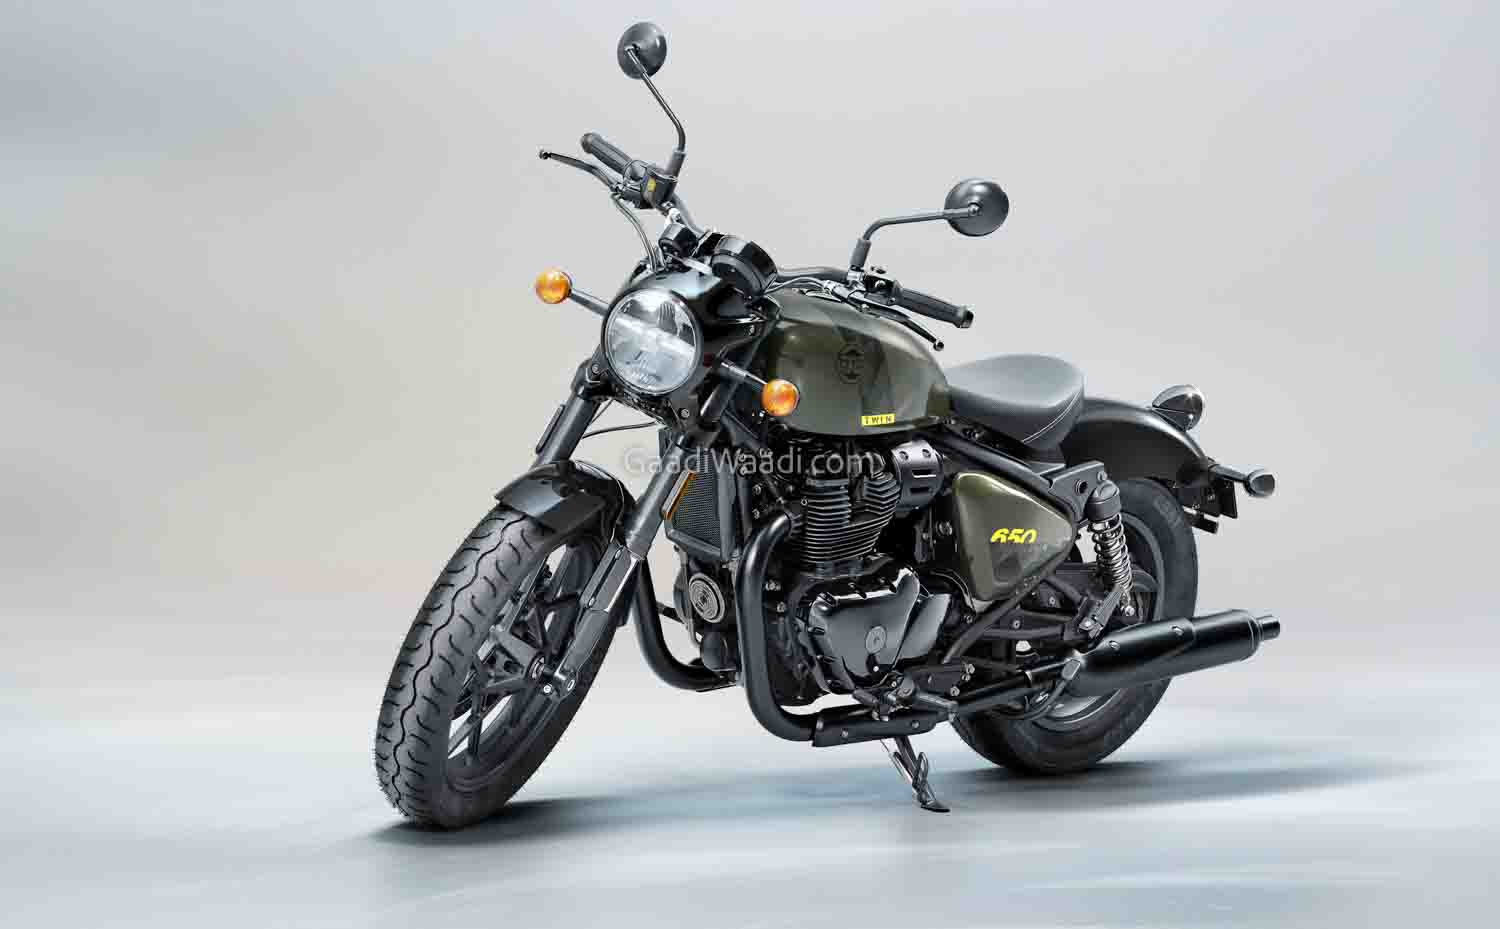 Royal Enfield Shotgun 650 Launched In India At Rs. 3.59 Lakh